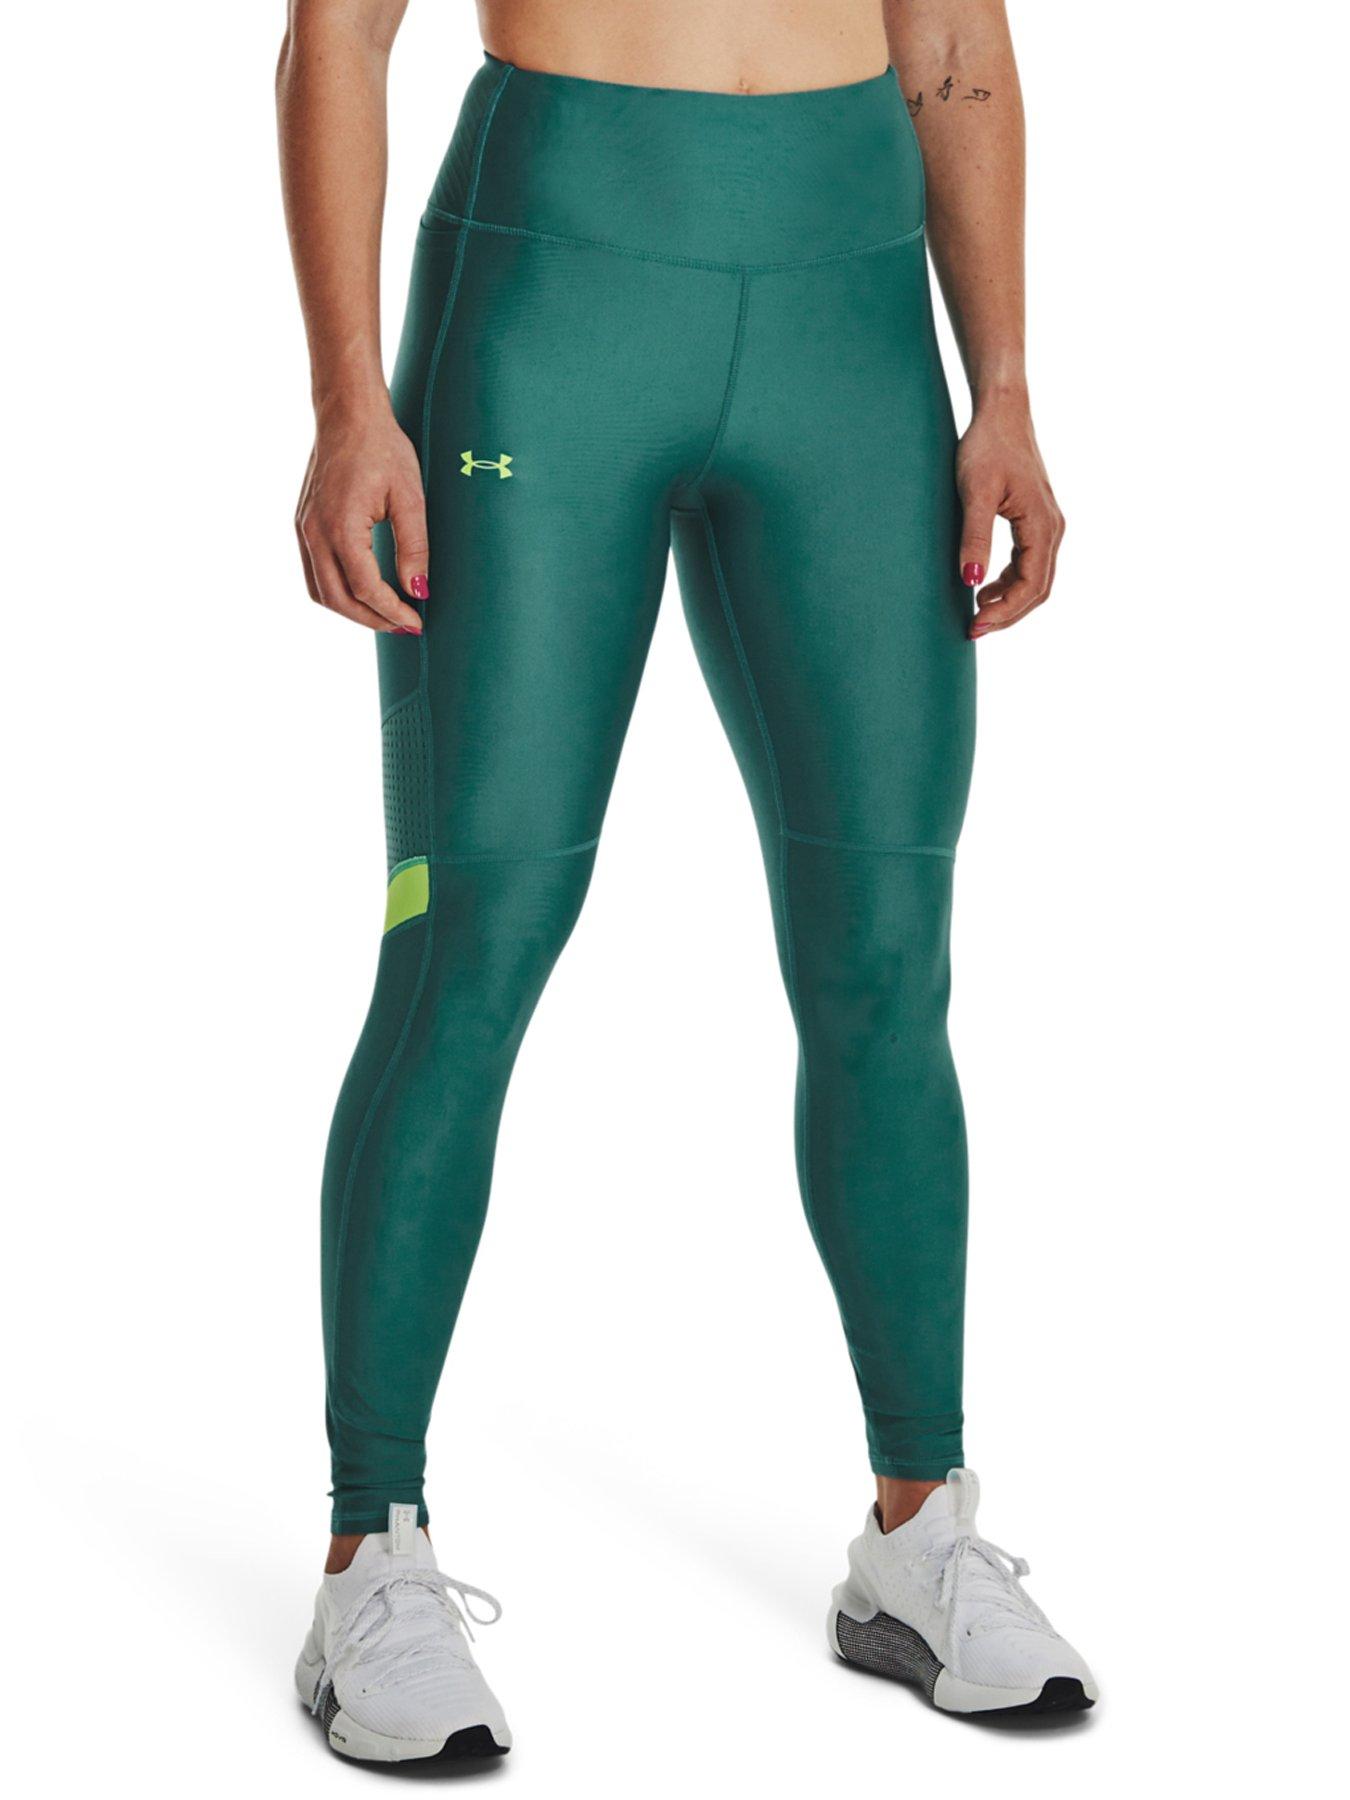 Tlc Sport Performance High Tummy Control Extra Strong Compression